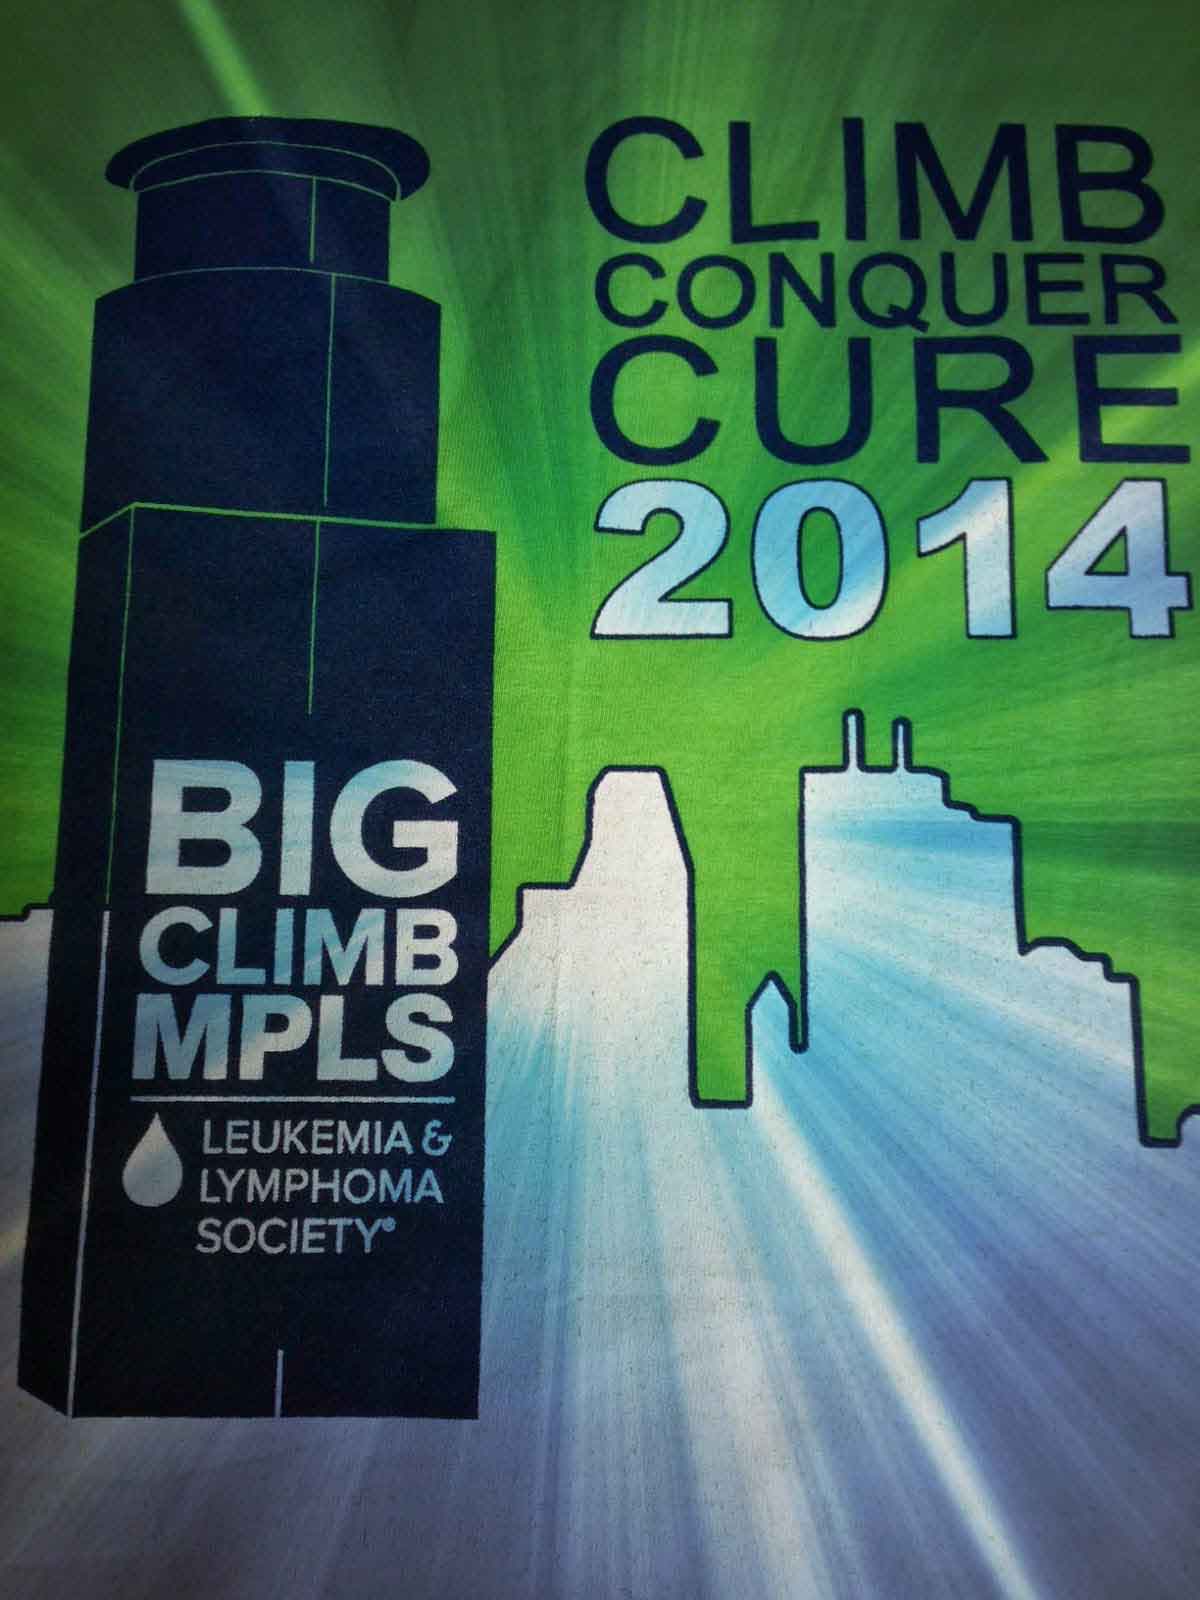 The Big Climb 2014 promotional poster that reads Climb conquer Cure 2014